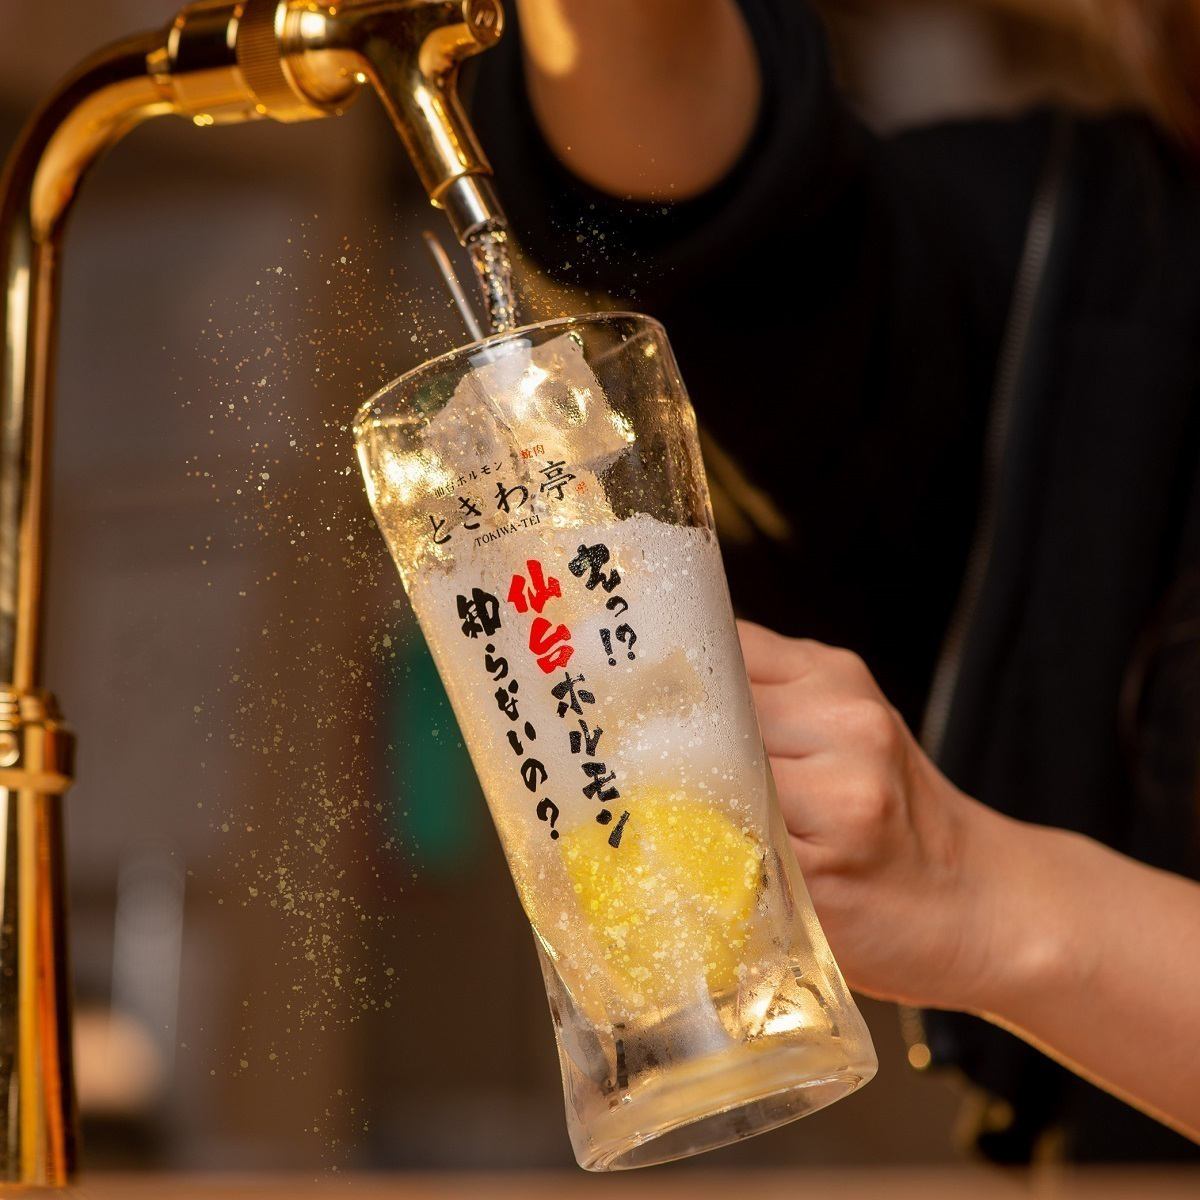 [You can drink it right away when you want] 0 seconds lemon sour 60 minutes 500 yen!